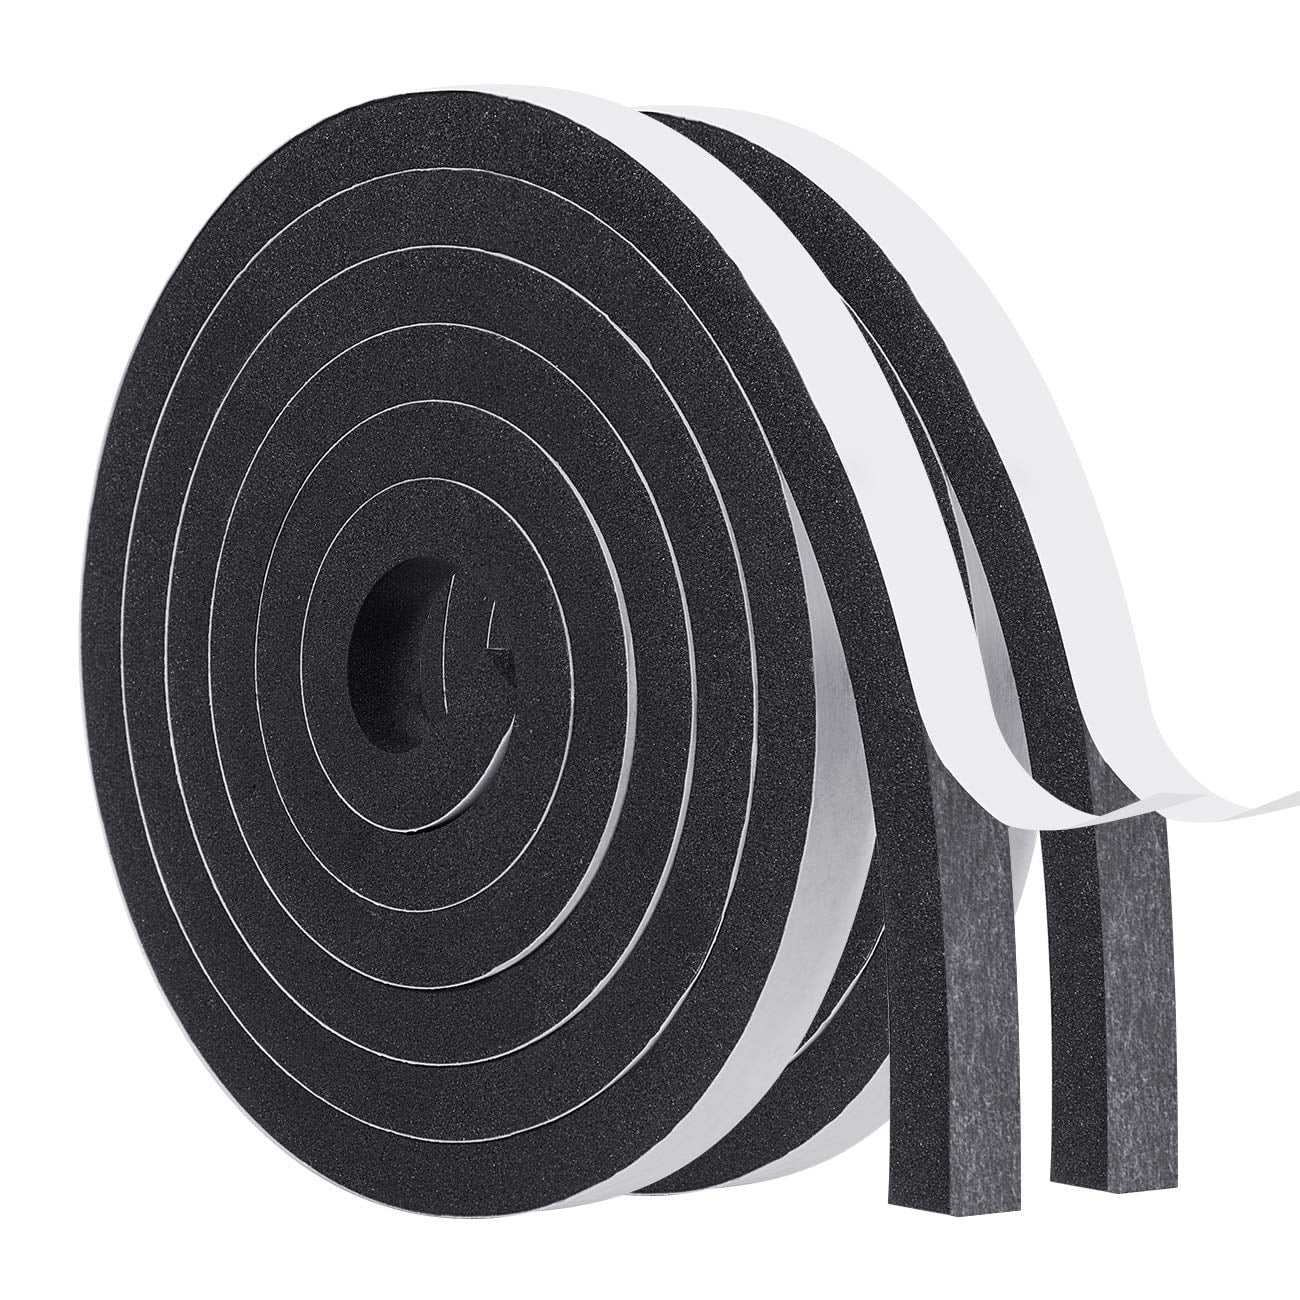 Weather Stripping Tape-2 Rolls 1 Inch Wide X 1/8 Inch Thick White High Density Soundproofing Door Insulation AC Unit Weather Seal Total 33 Feet Long 16.5ft x 2 Rolls 